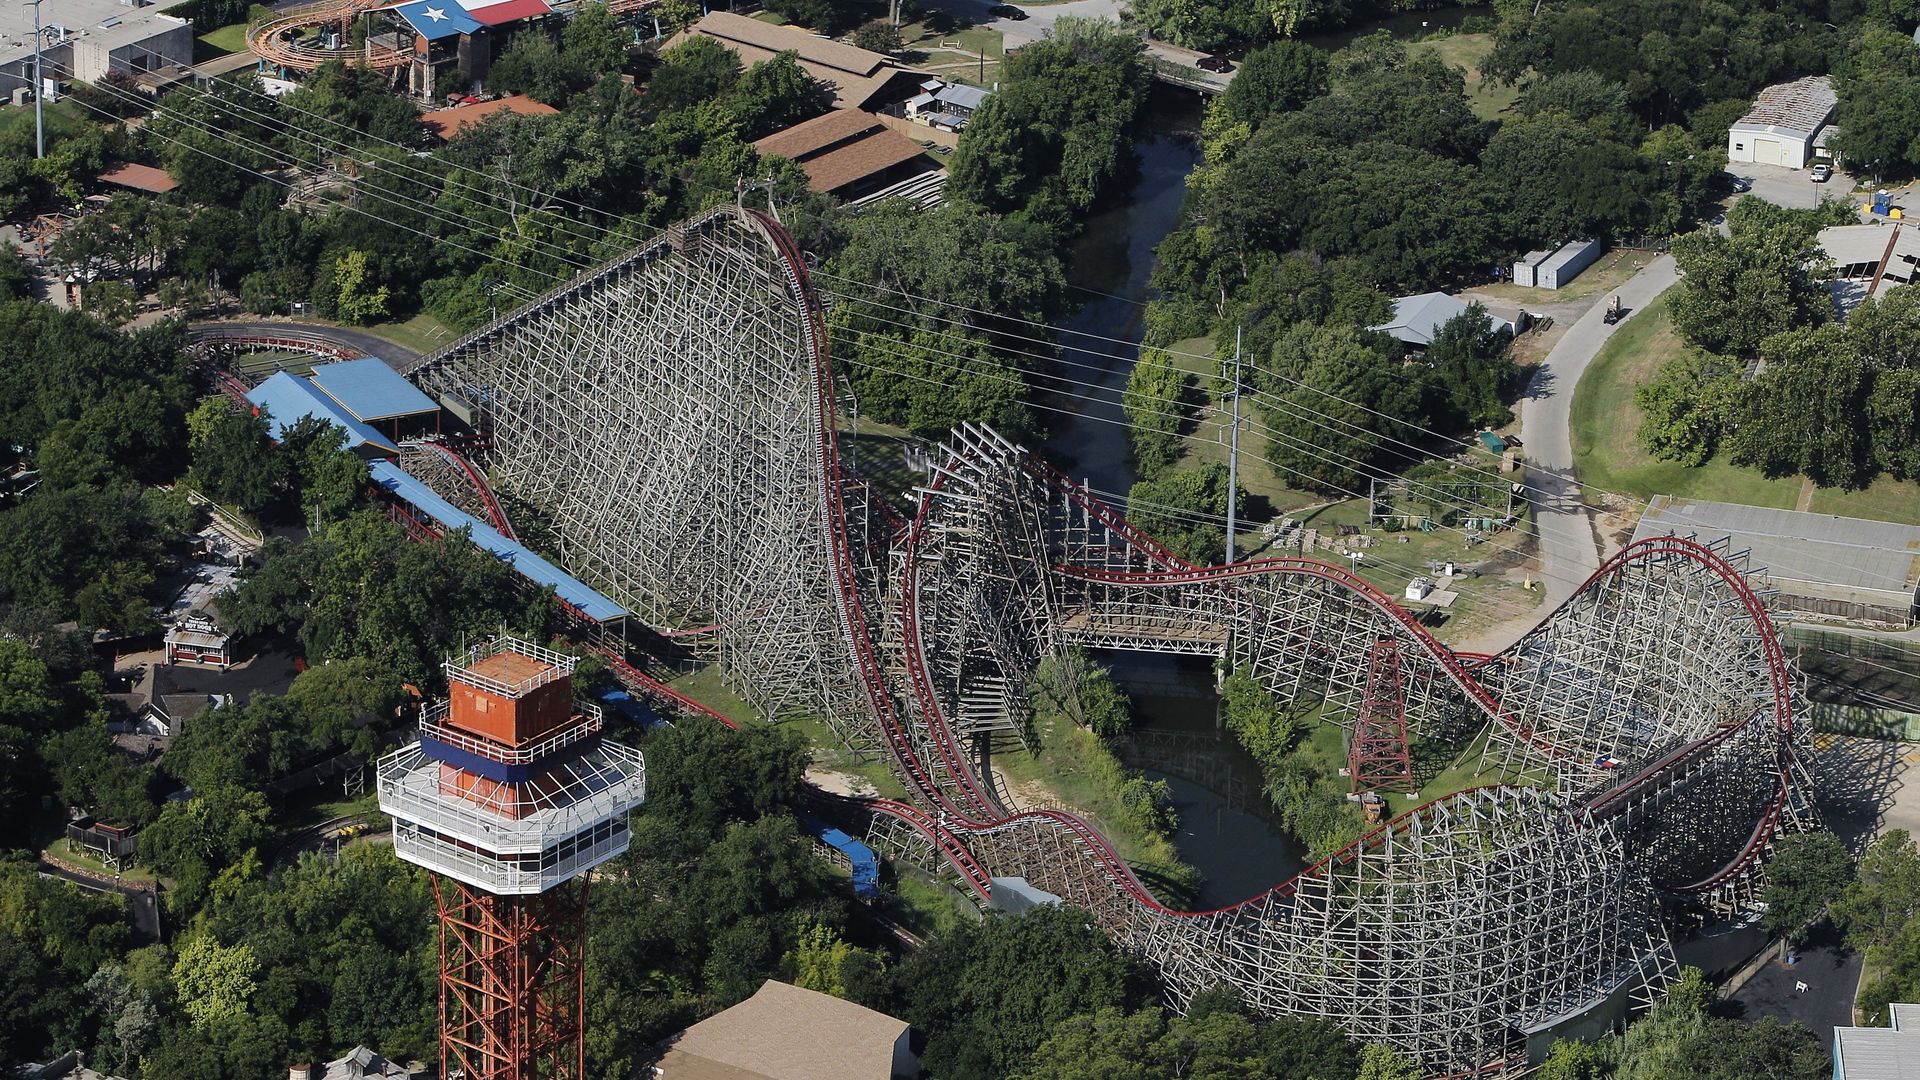 Six Flags roller coasters, as seen from the sky